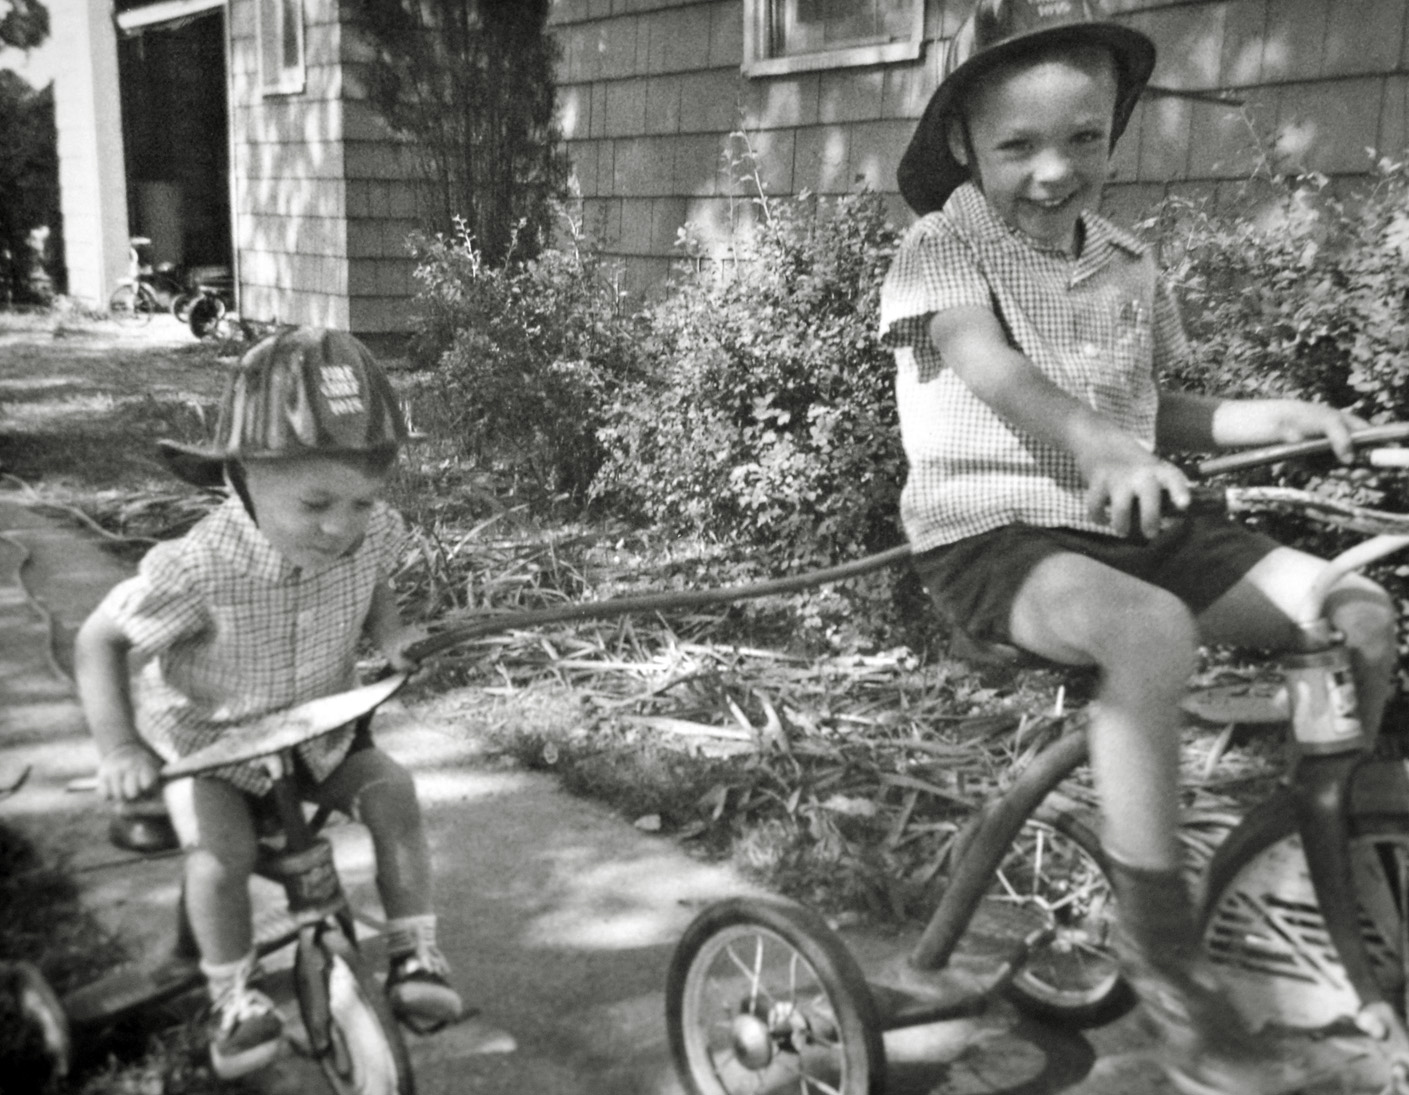 My older brother and me going on a fire run. 1962, Akron Ohio. View full size.